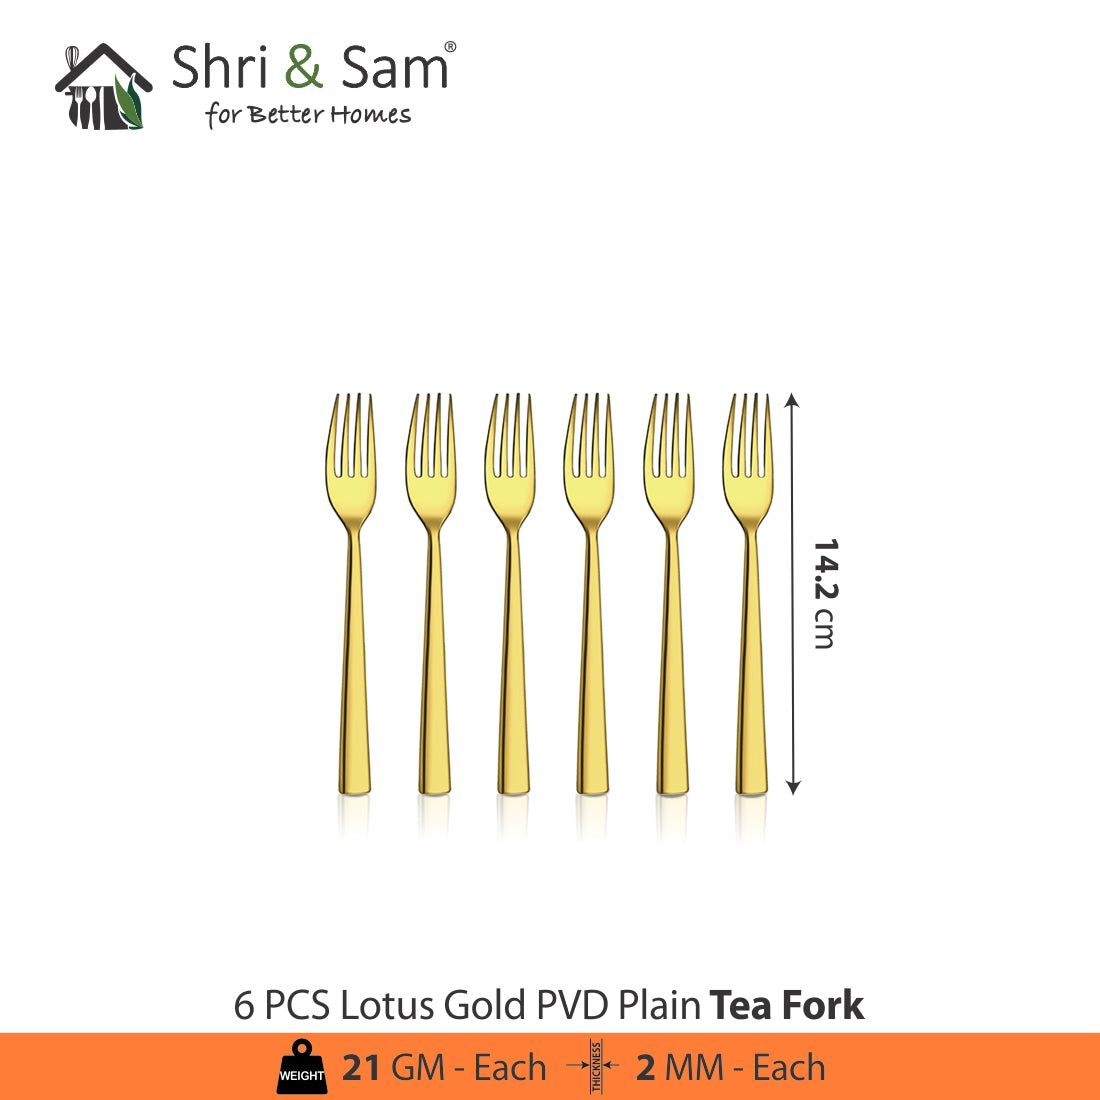 Stainless Steel Cutlery with Gold PVD Coating Lotus Plain